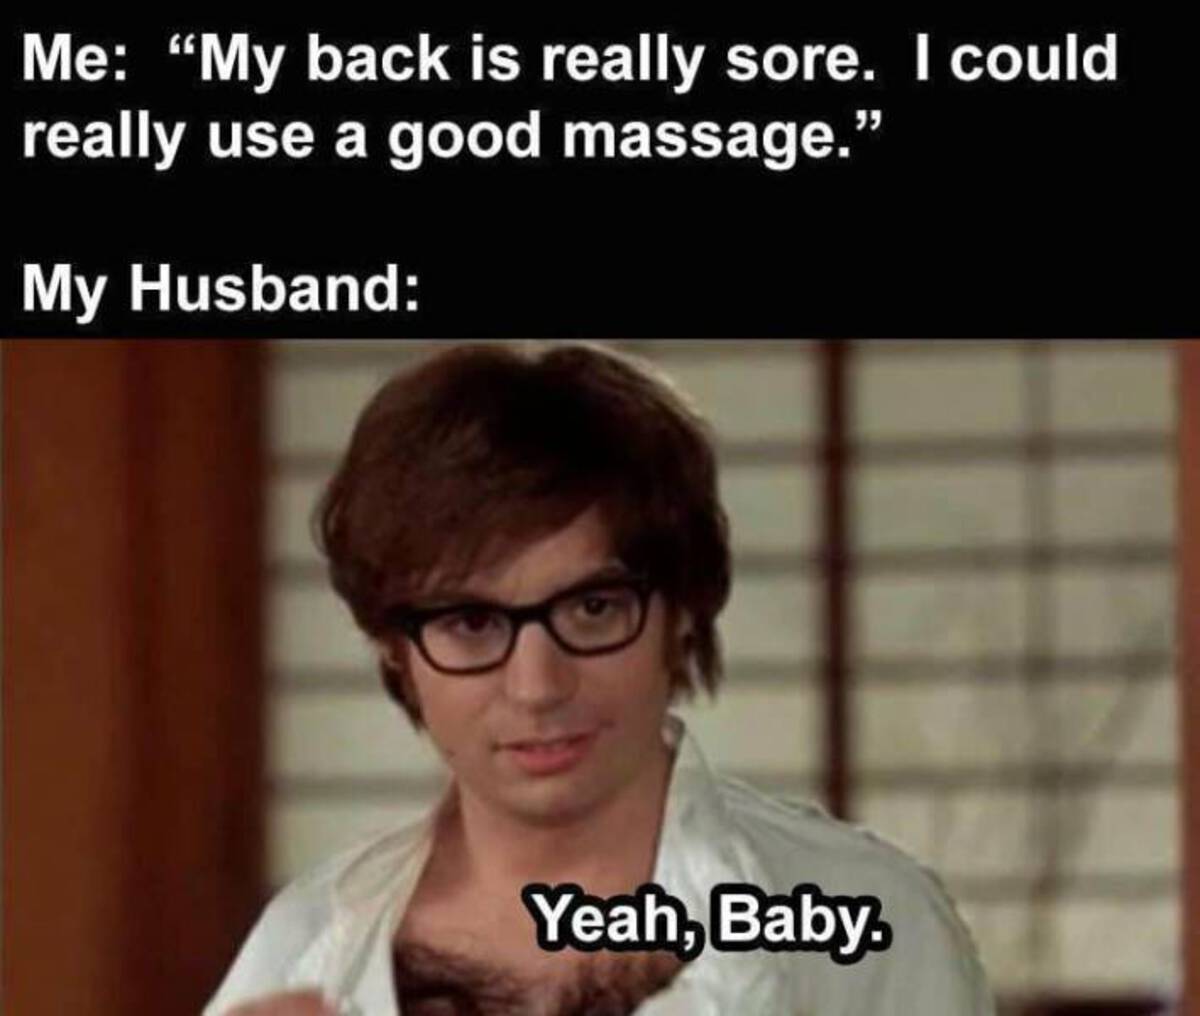 sore back memes - Me "My back is really sore. I could really use a good massage." My Husband Yeah, Baby.